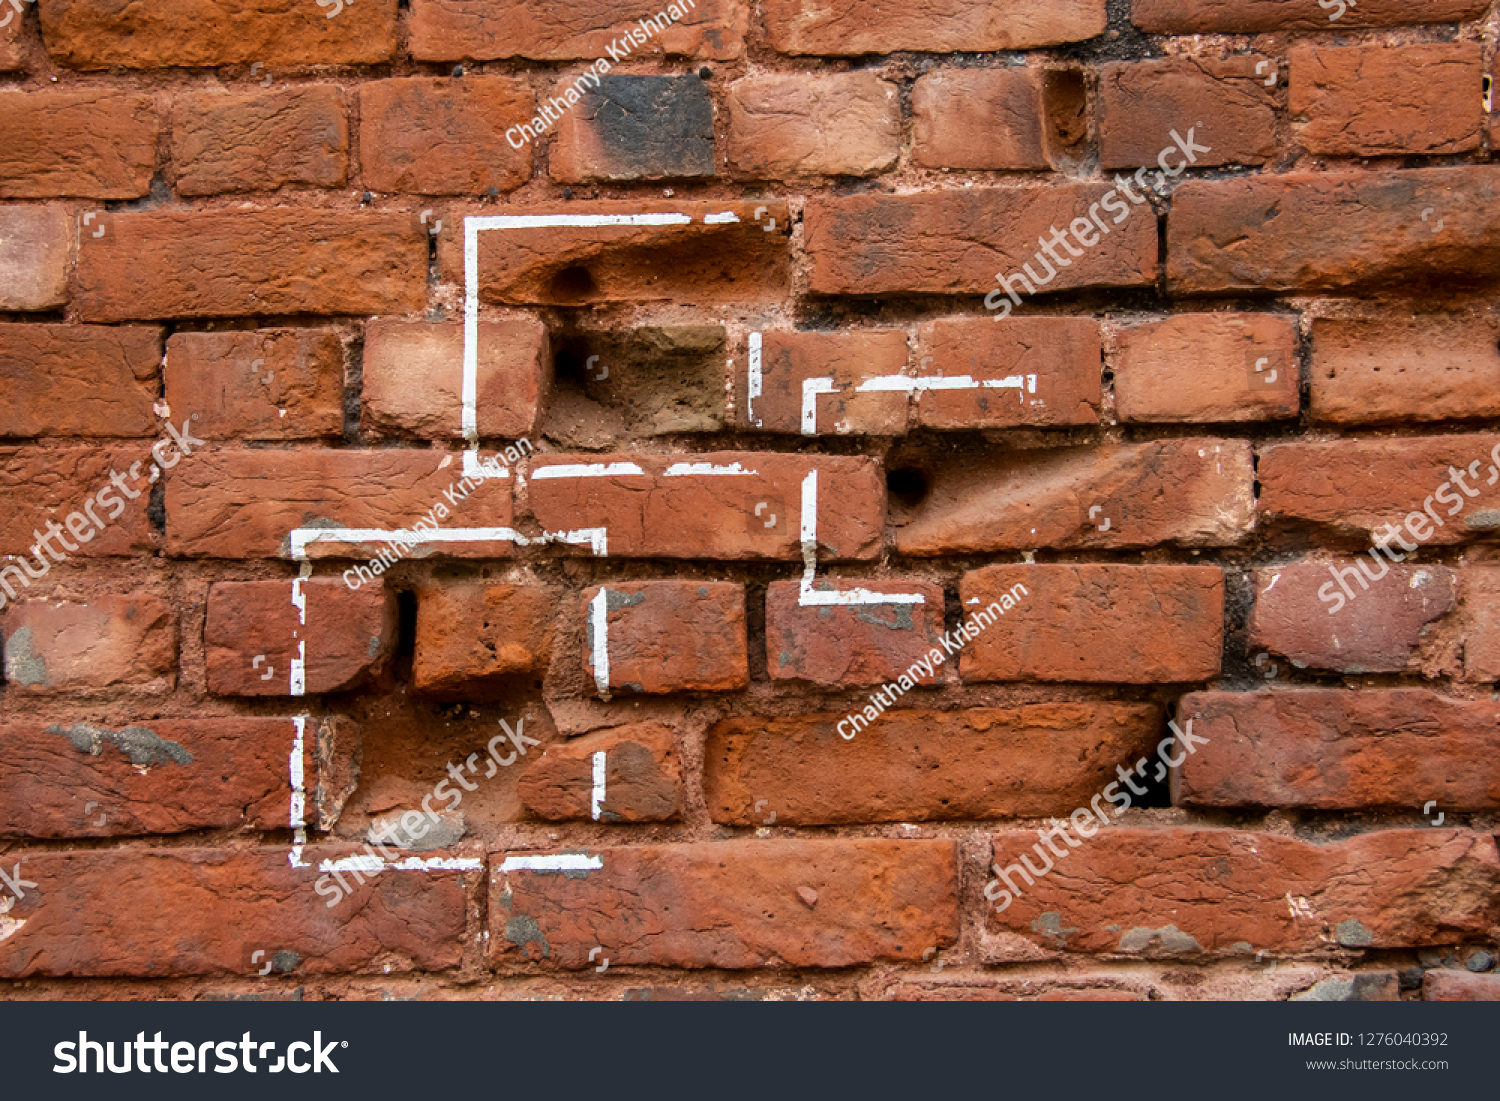 Bullet marks on a brick wall showing the atrocities of British rule in Indian subcontinent during east india rule #1276040392